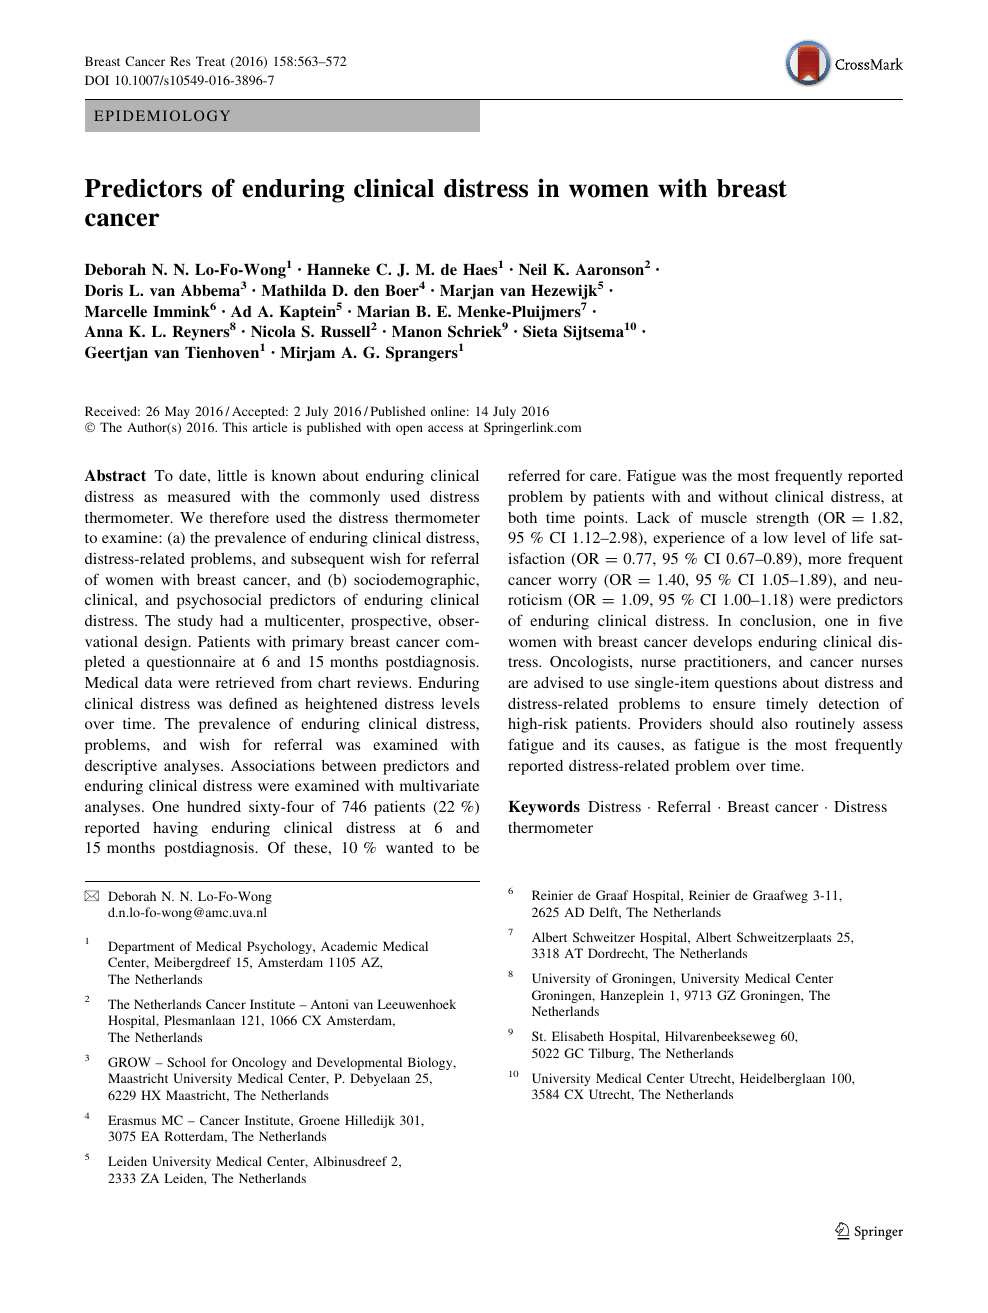 Predictors Of Enduring Clinical Distress In Women With Breast Cancer Topic Of Research Paper In Health Sciences Download Scholarly Article Pdf And Read For Free On Cyberleninka Open Science Hub